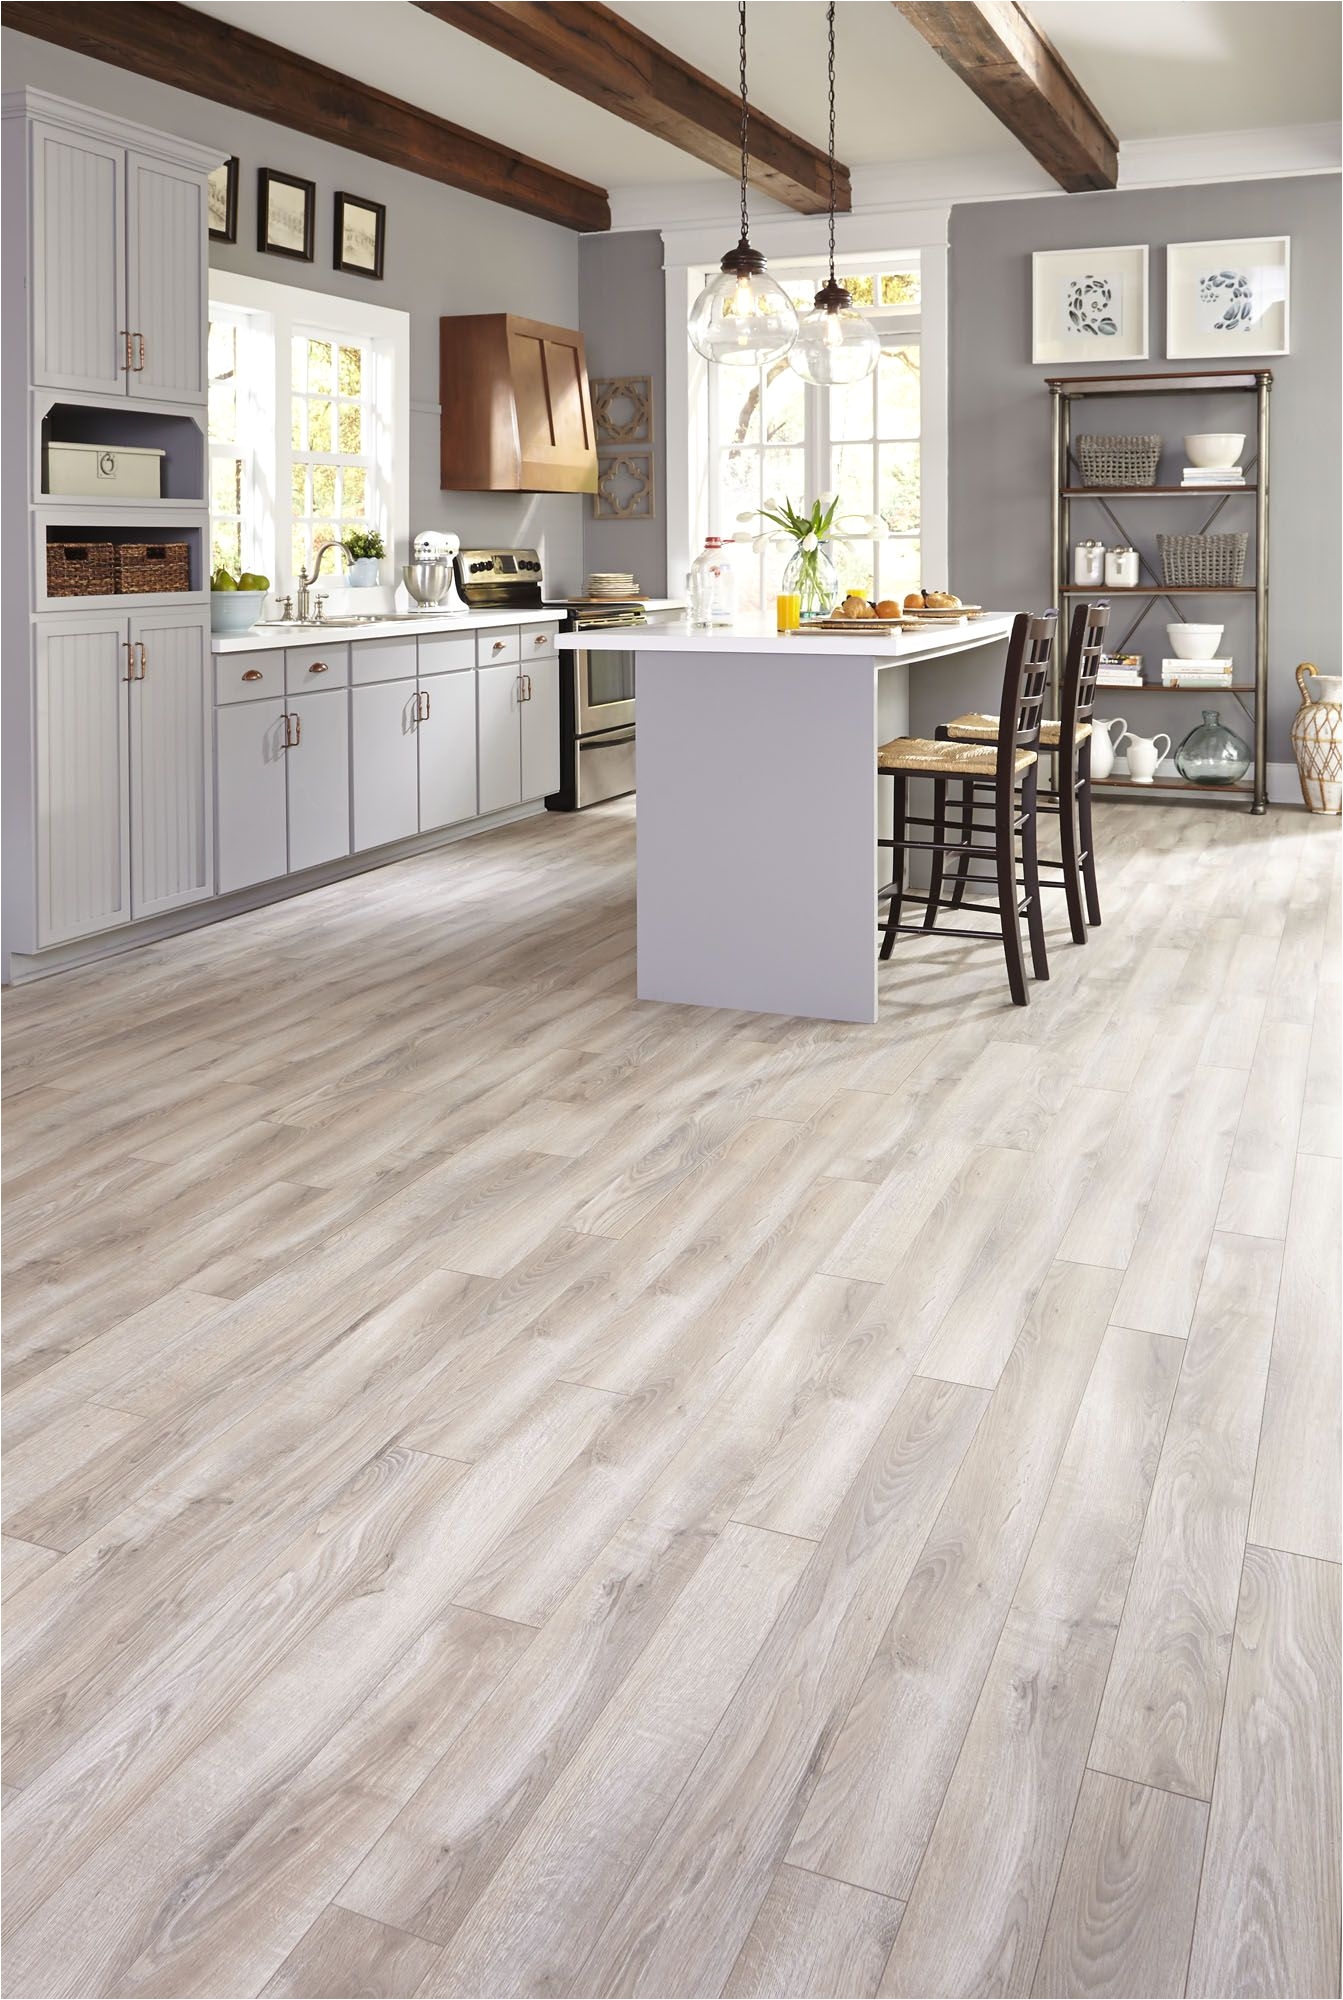 gray tones mixed with light creams and tans suggest a floor worn over time evoking a classic yet contemporary style check out this featured style